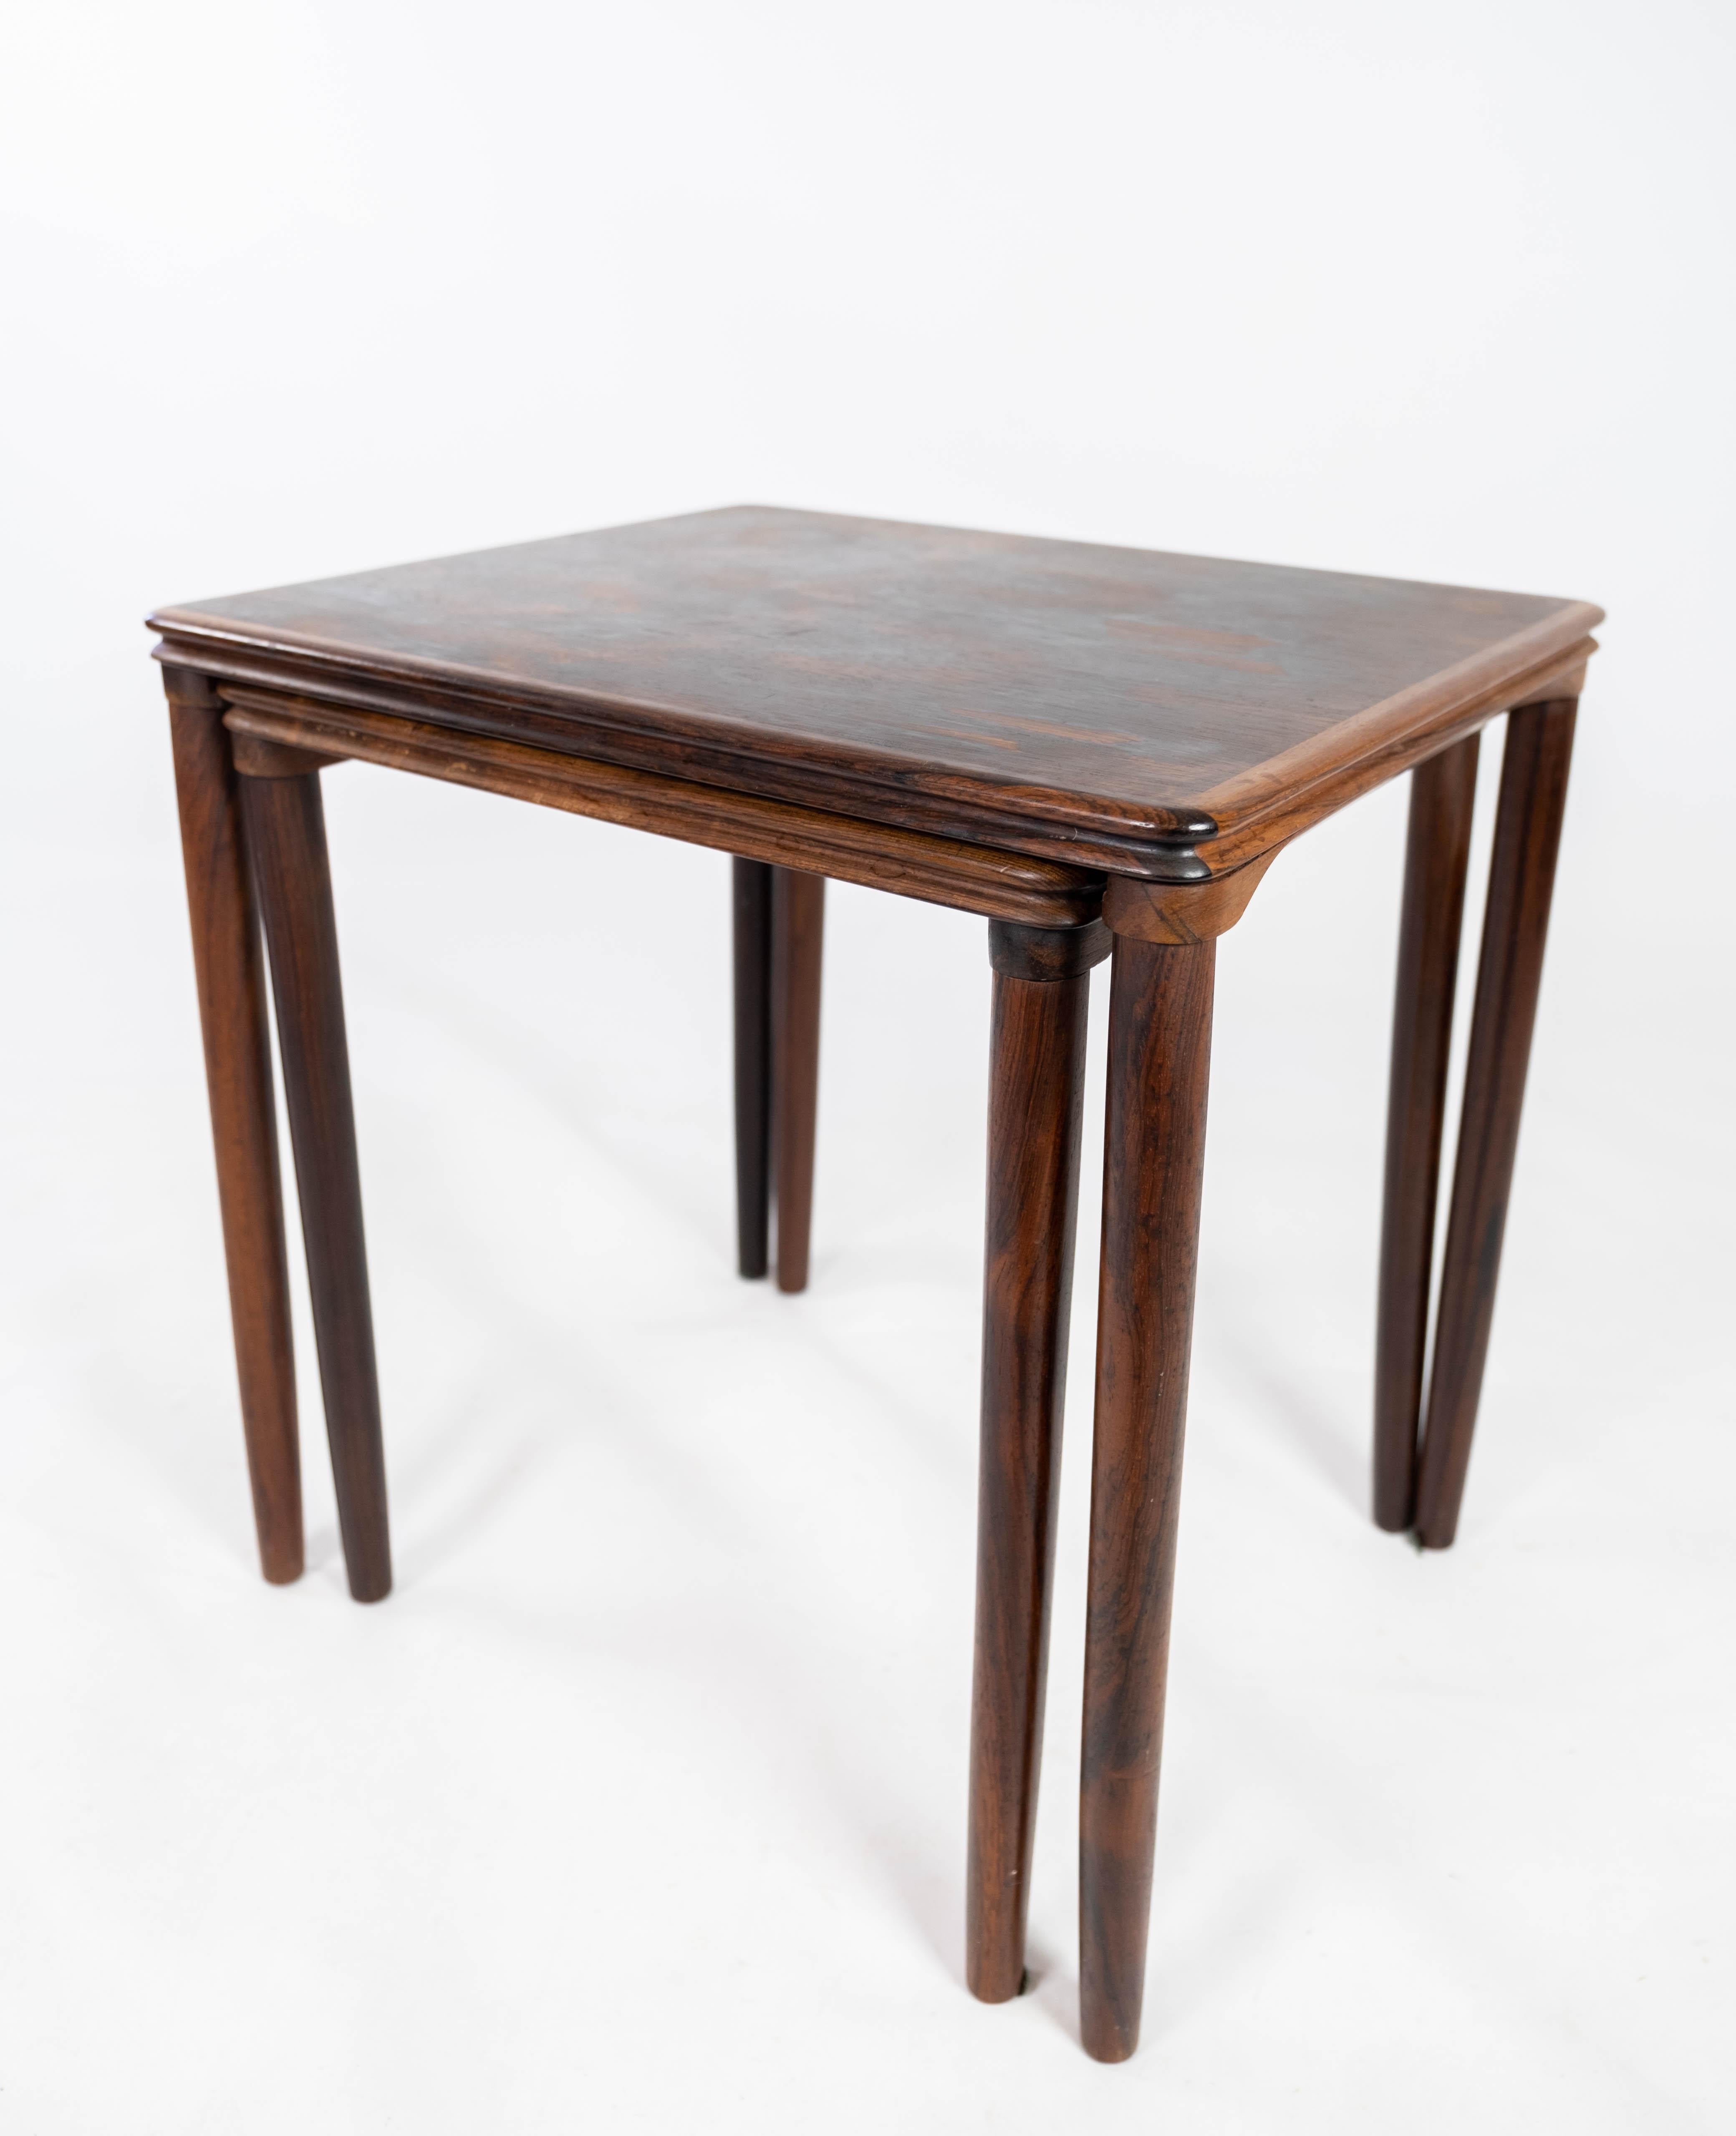 Mid-20th Century Nesting Tables in Rosewood of Danish Design from the 1960s For Sale